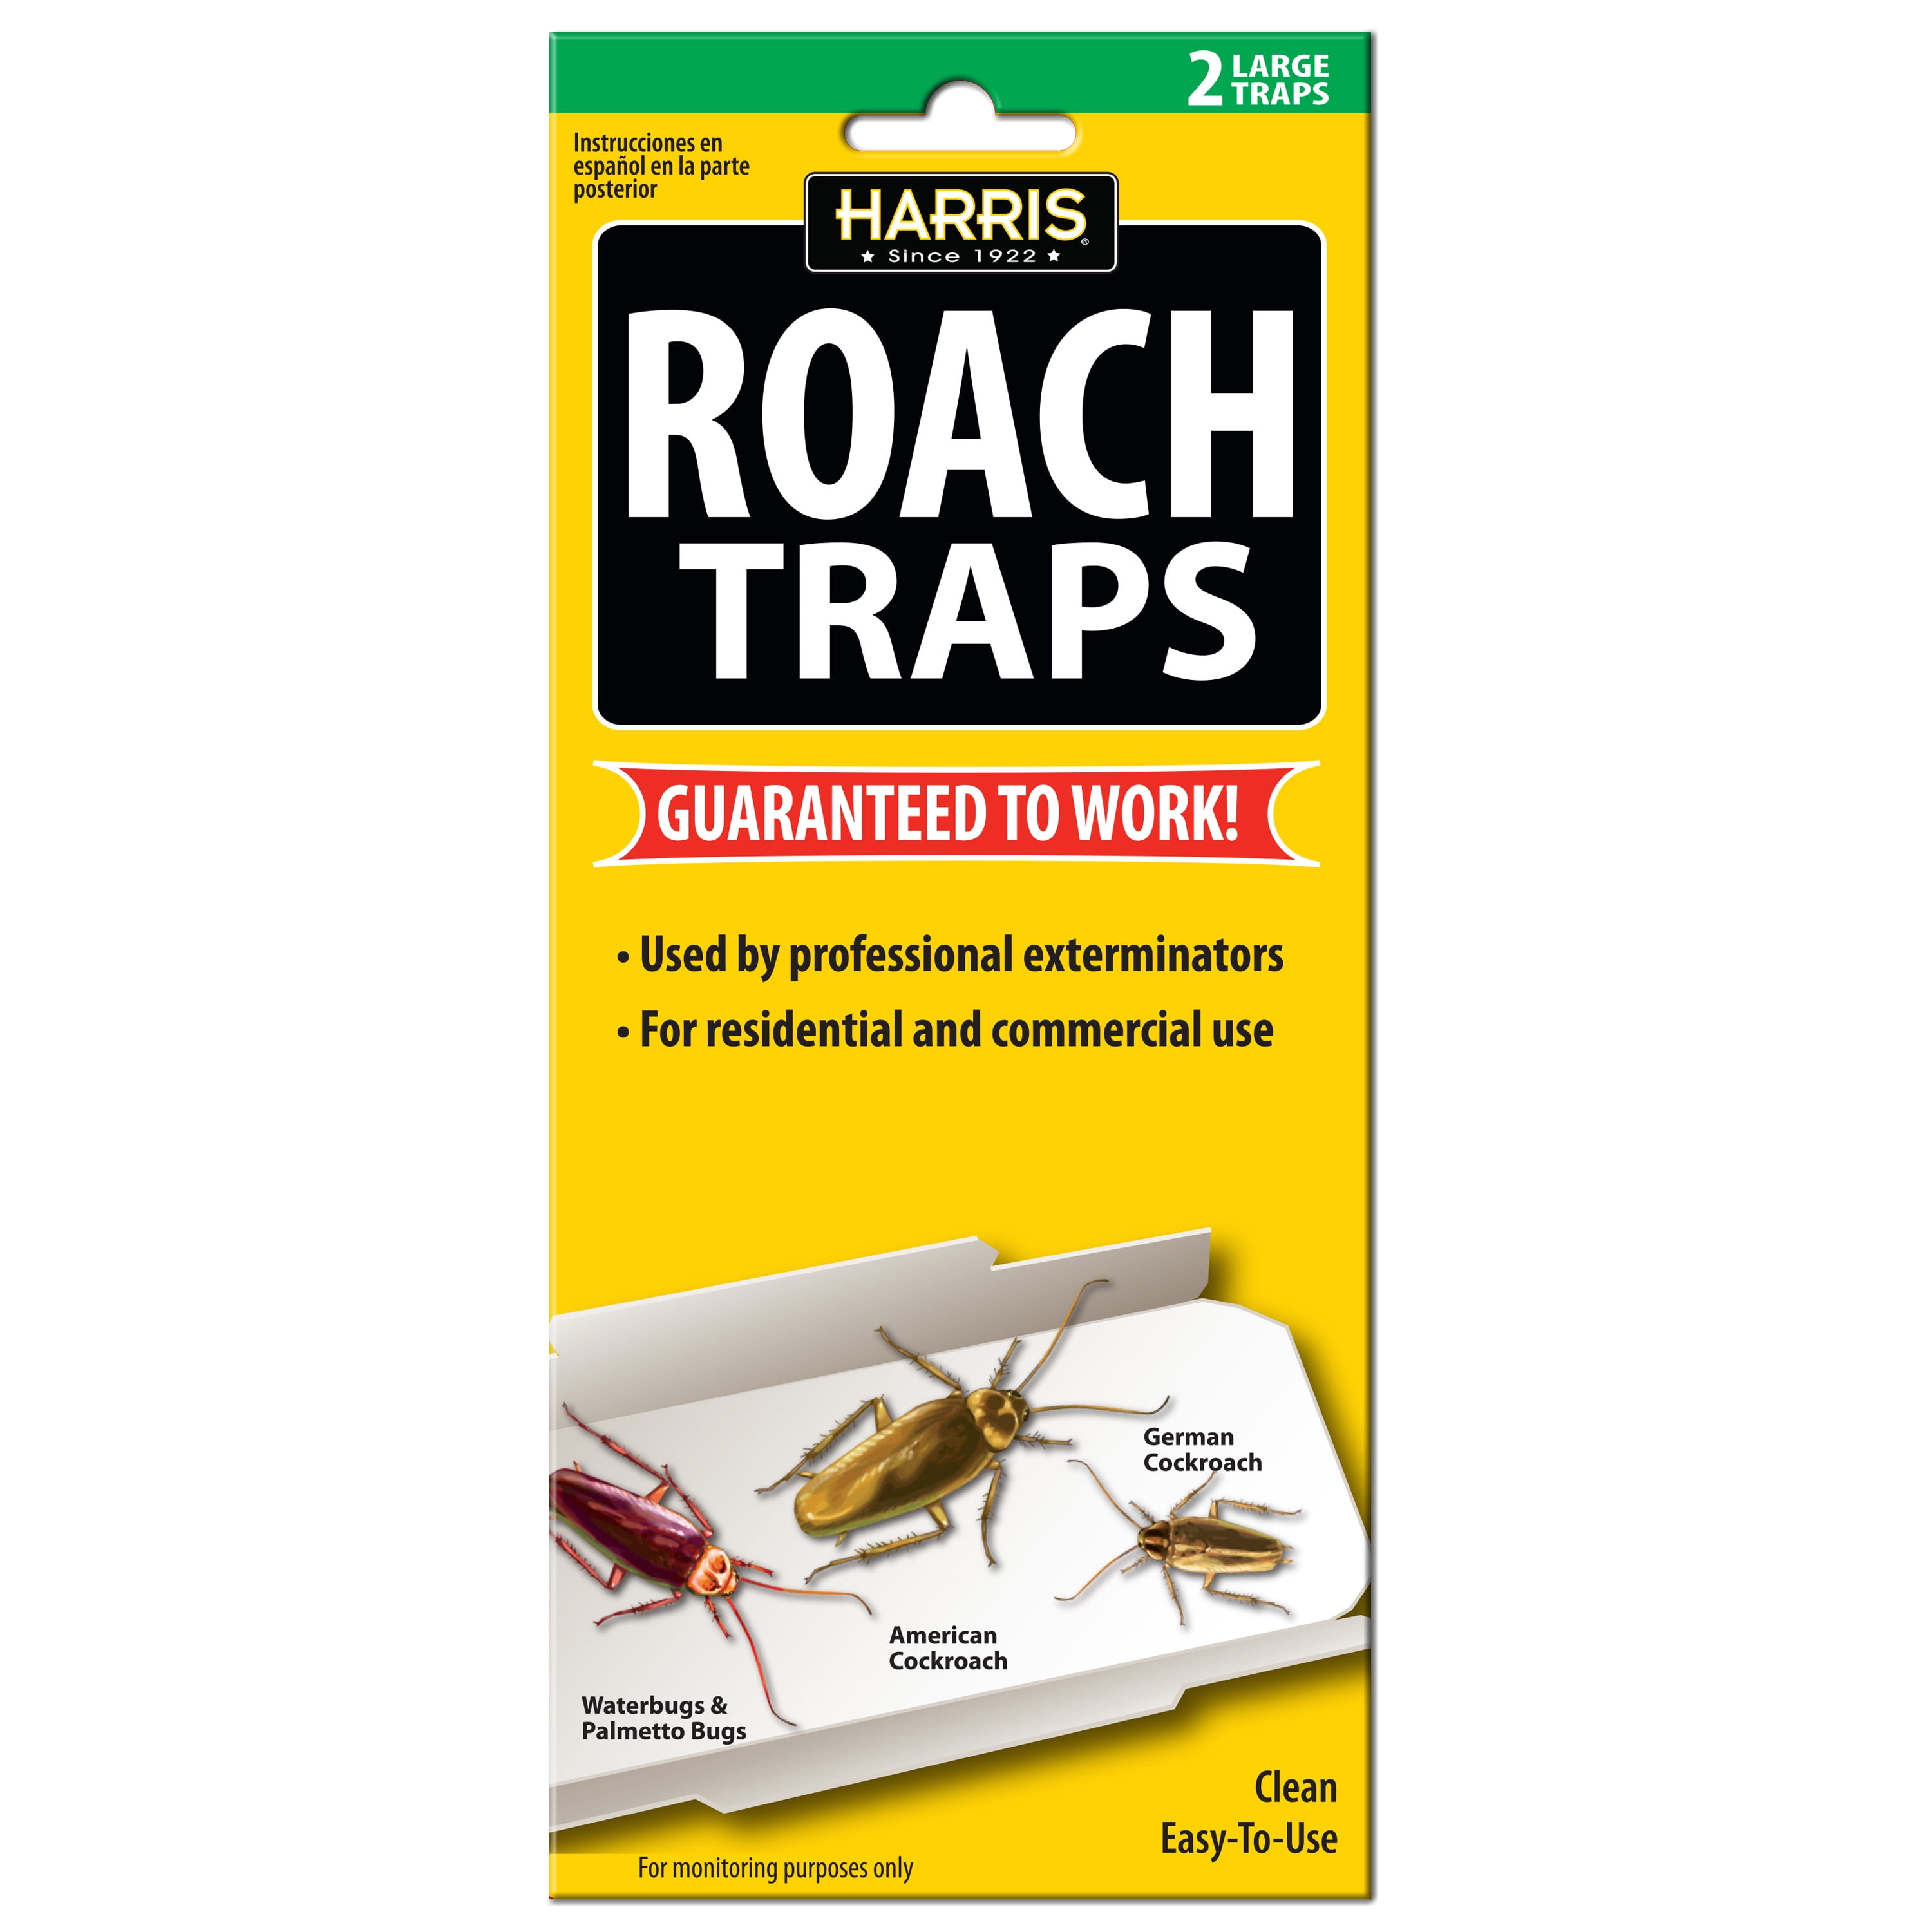 CATCHGENIUS ROACH INSECT TRAP Sticky Glue Boards Baited 4 TRAP/PCK FAST SHIPPING 